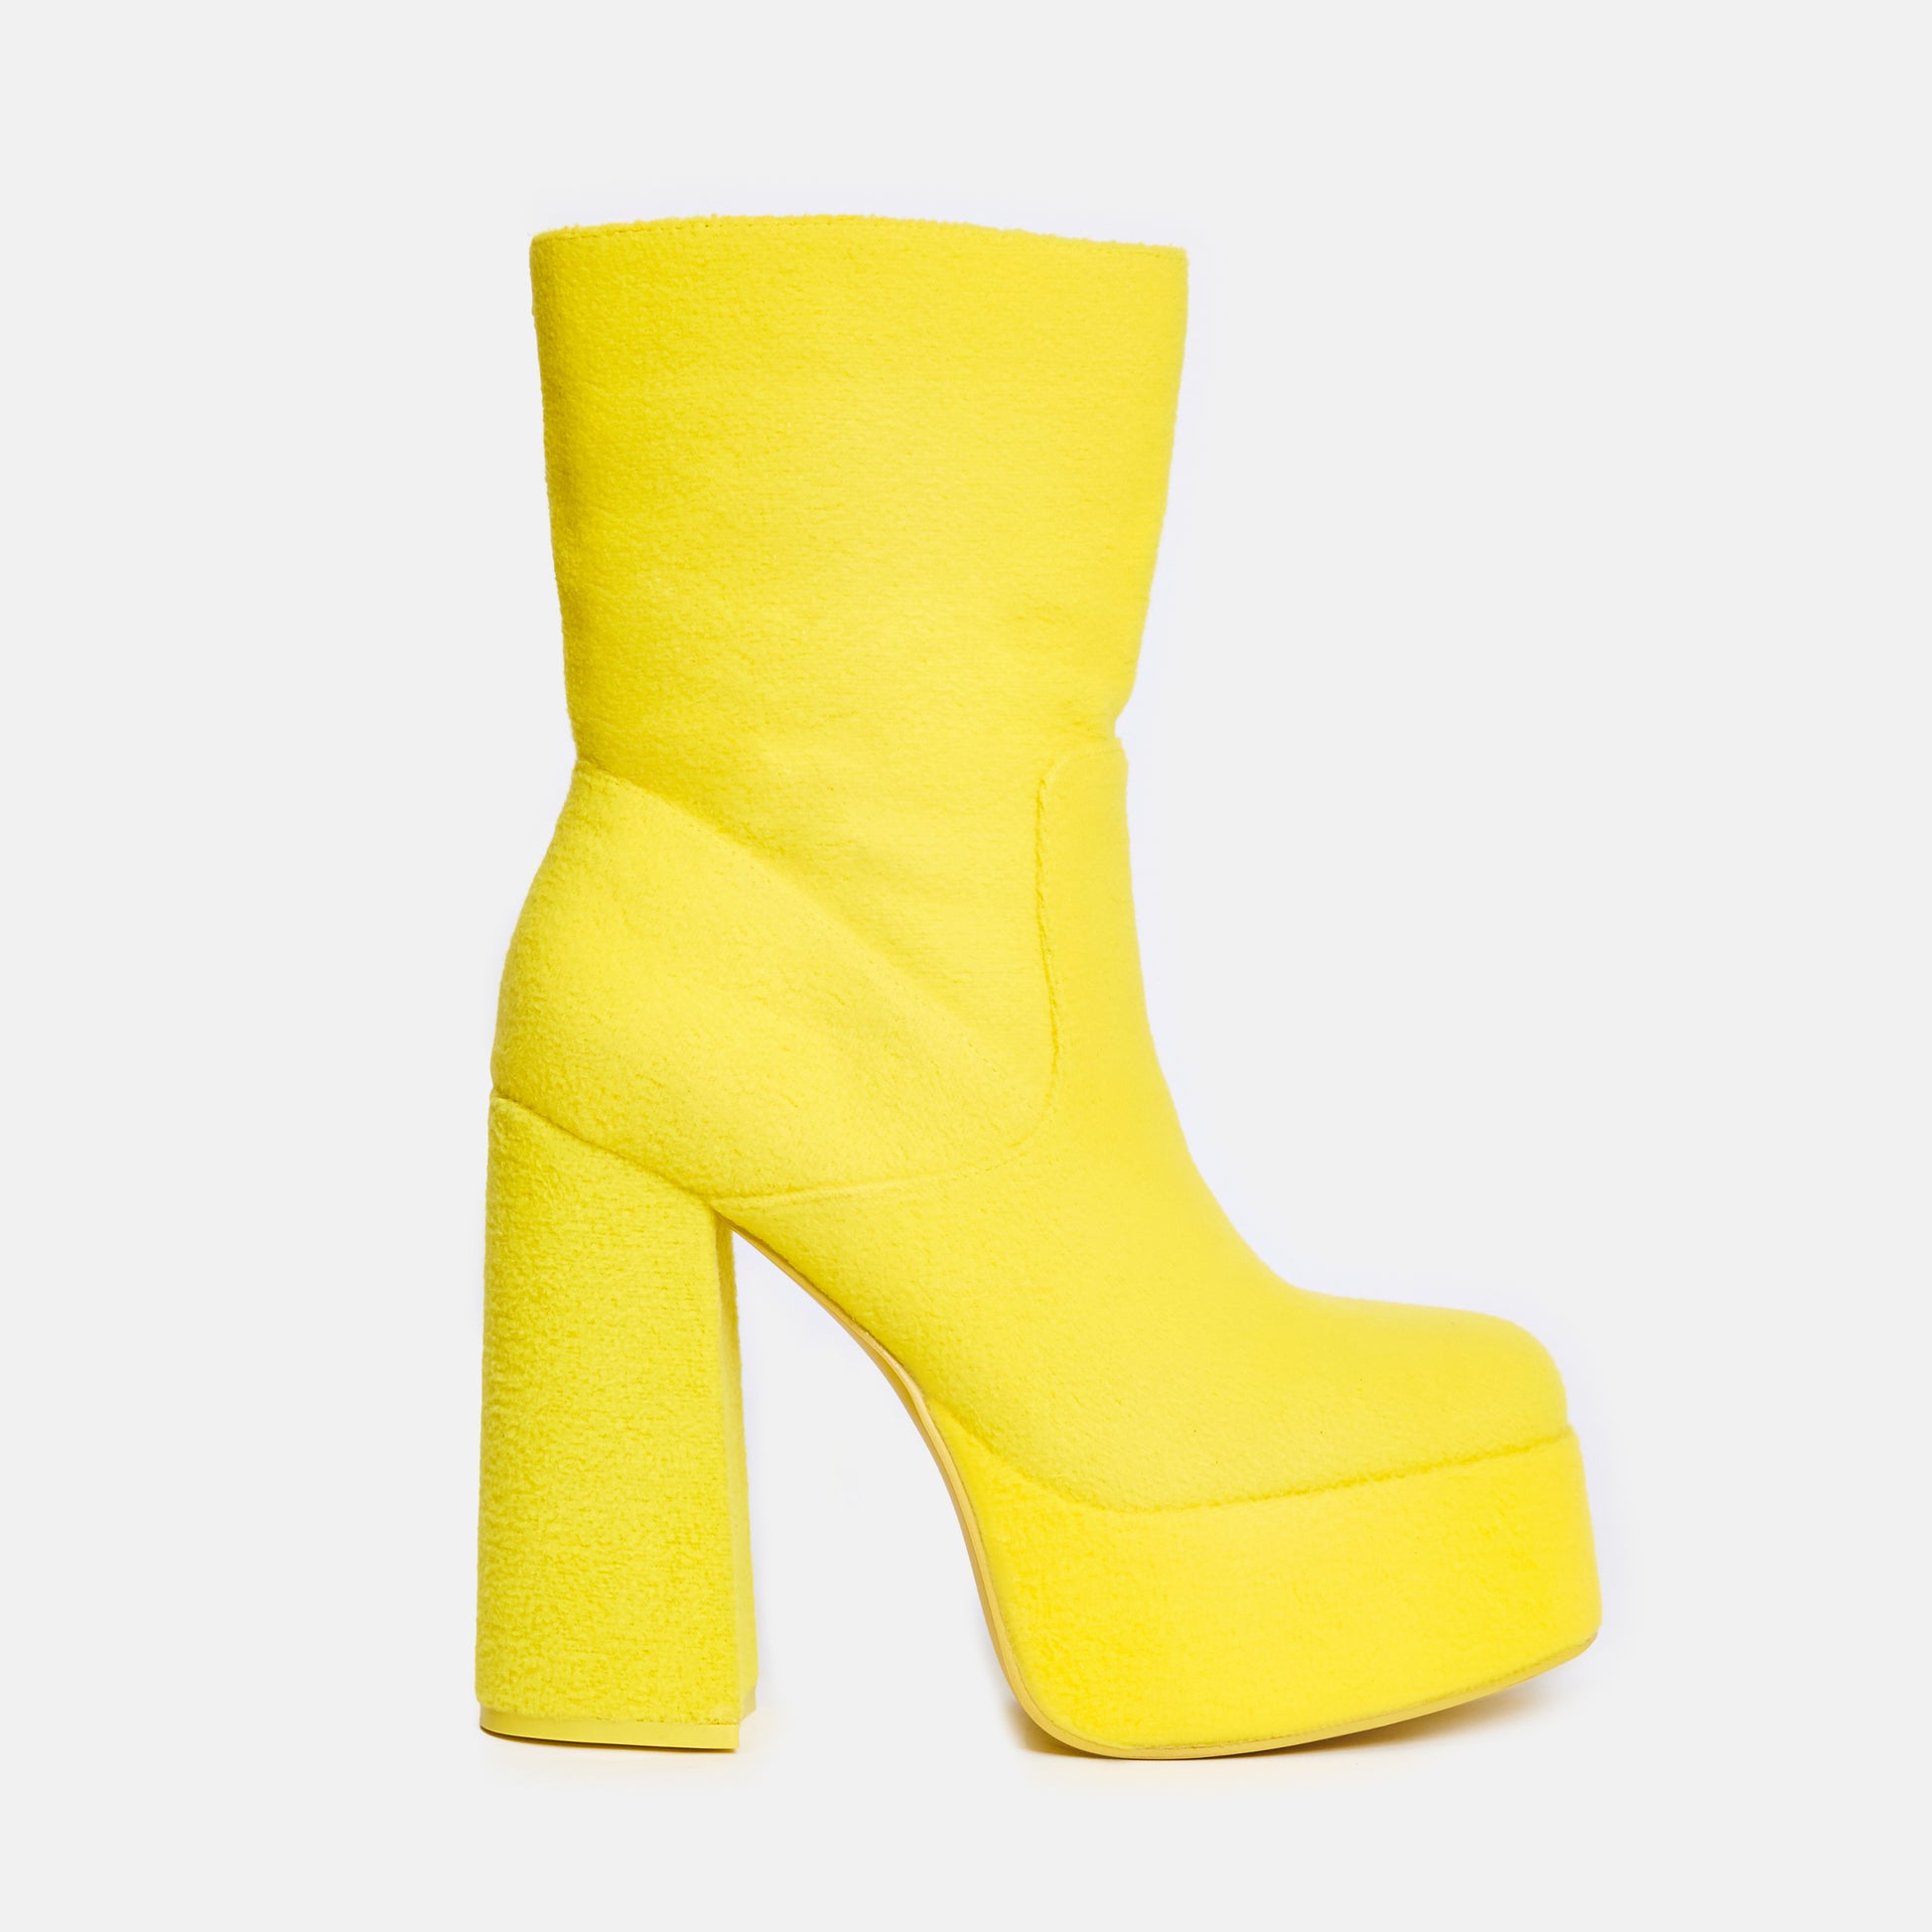 Laa Laa Fluffy Platform Boots - Ankle Boots - KOI Footwear - Yellow - Side View